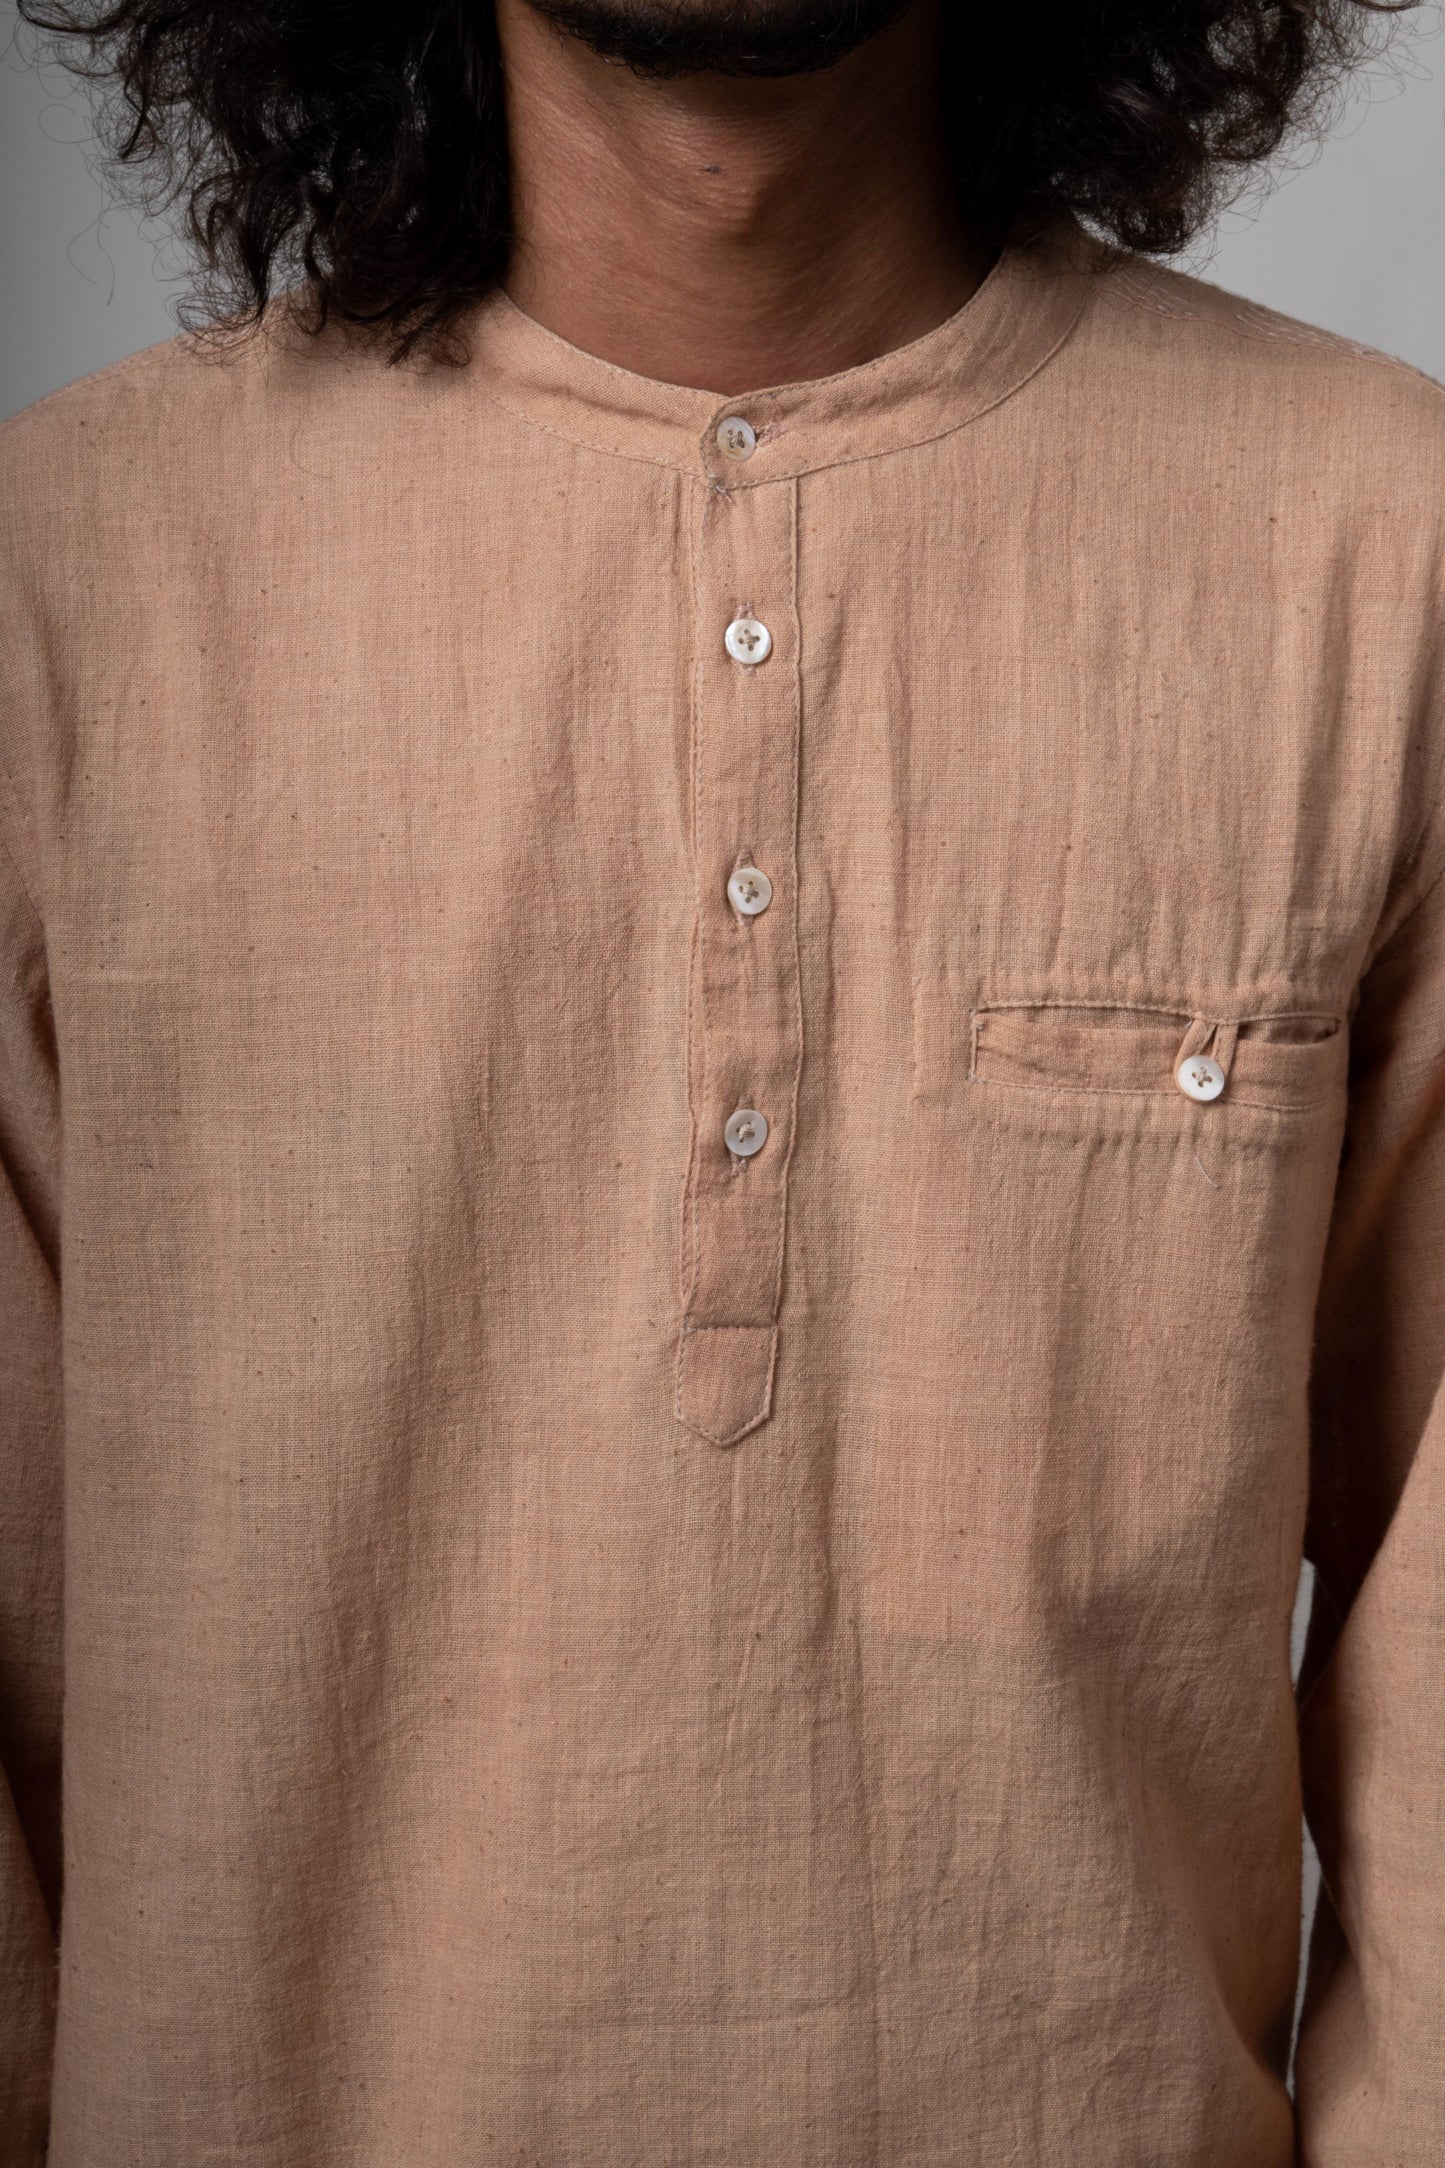 Beige Cotton Shirt at Kamakhyaa by Lafaani. This item is Brown, Casual Wear, Cotton, Fall, For Him, Menswear, Natural, Regular Fit, Shirts, Solids, Tops